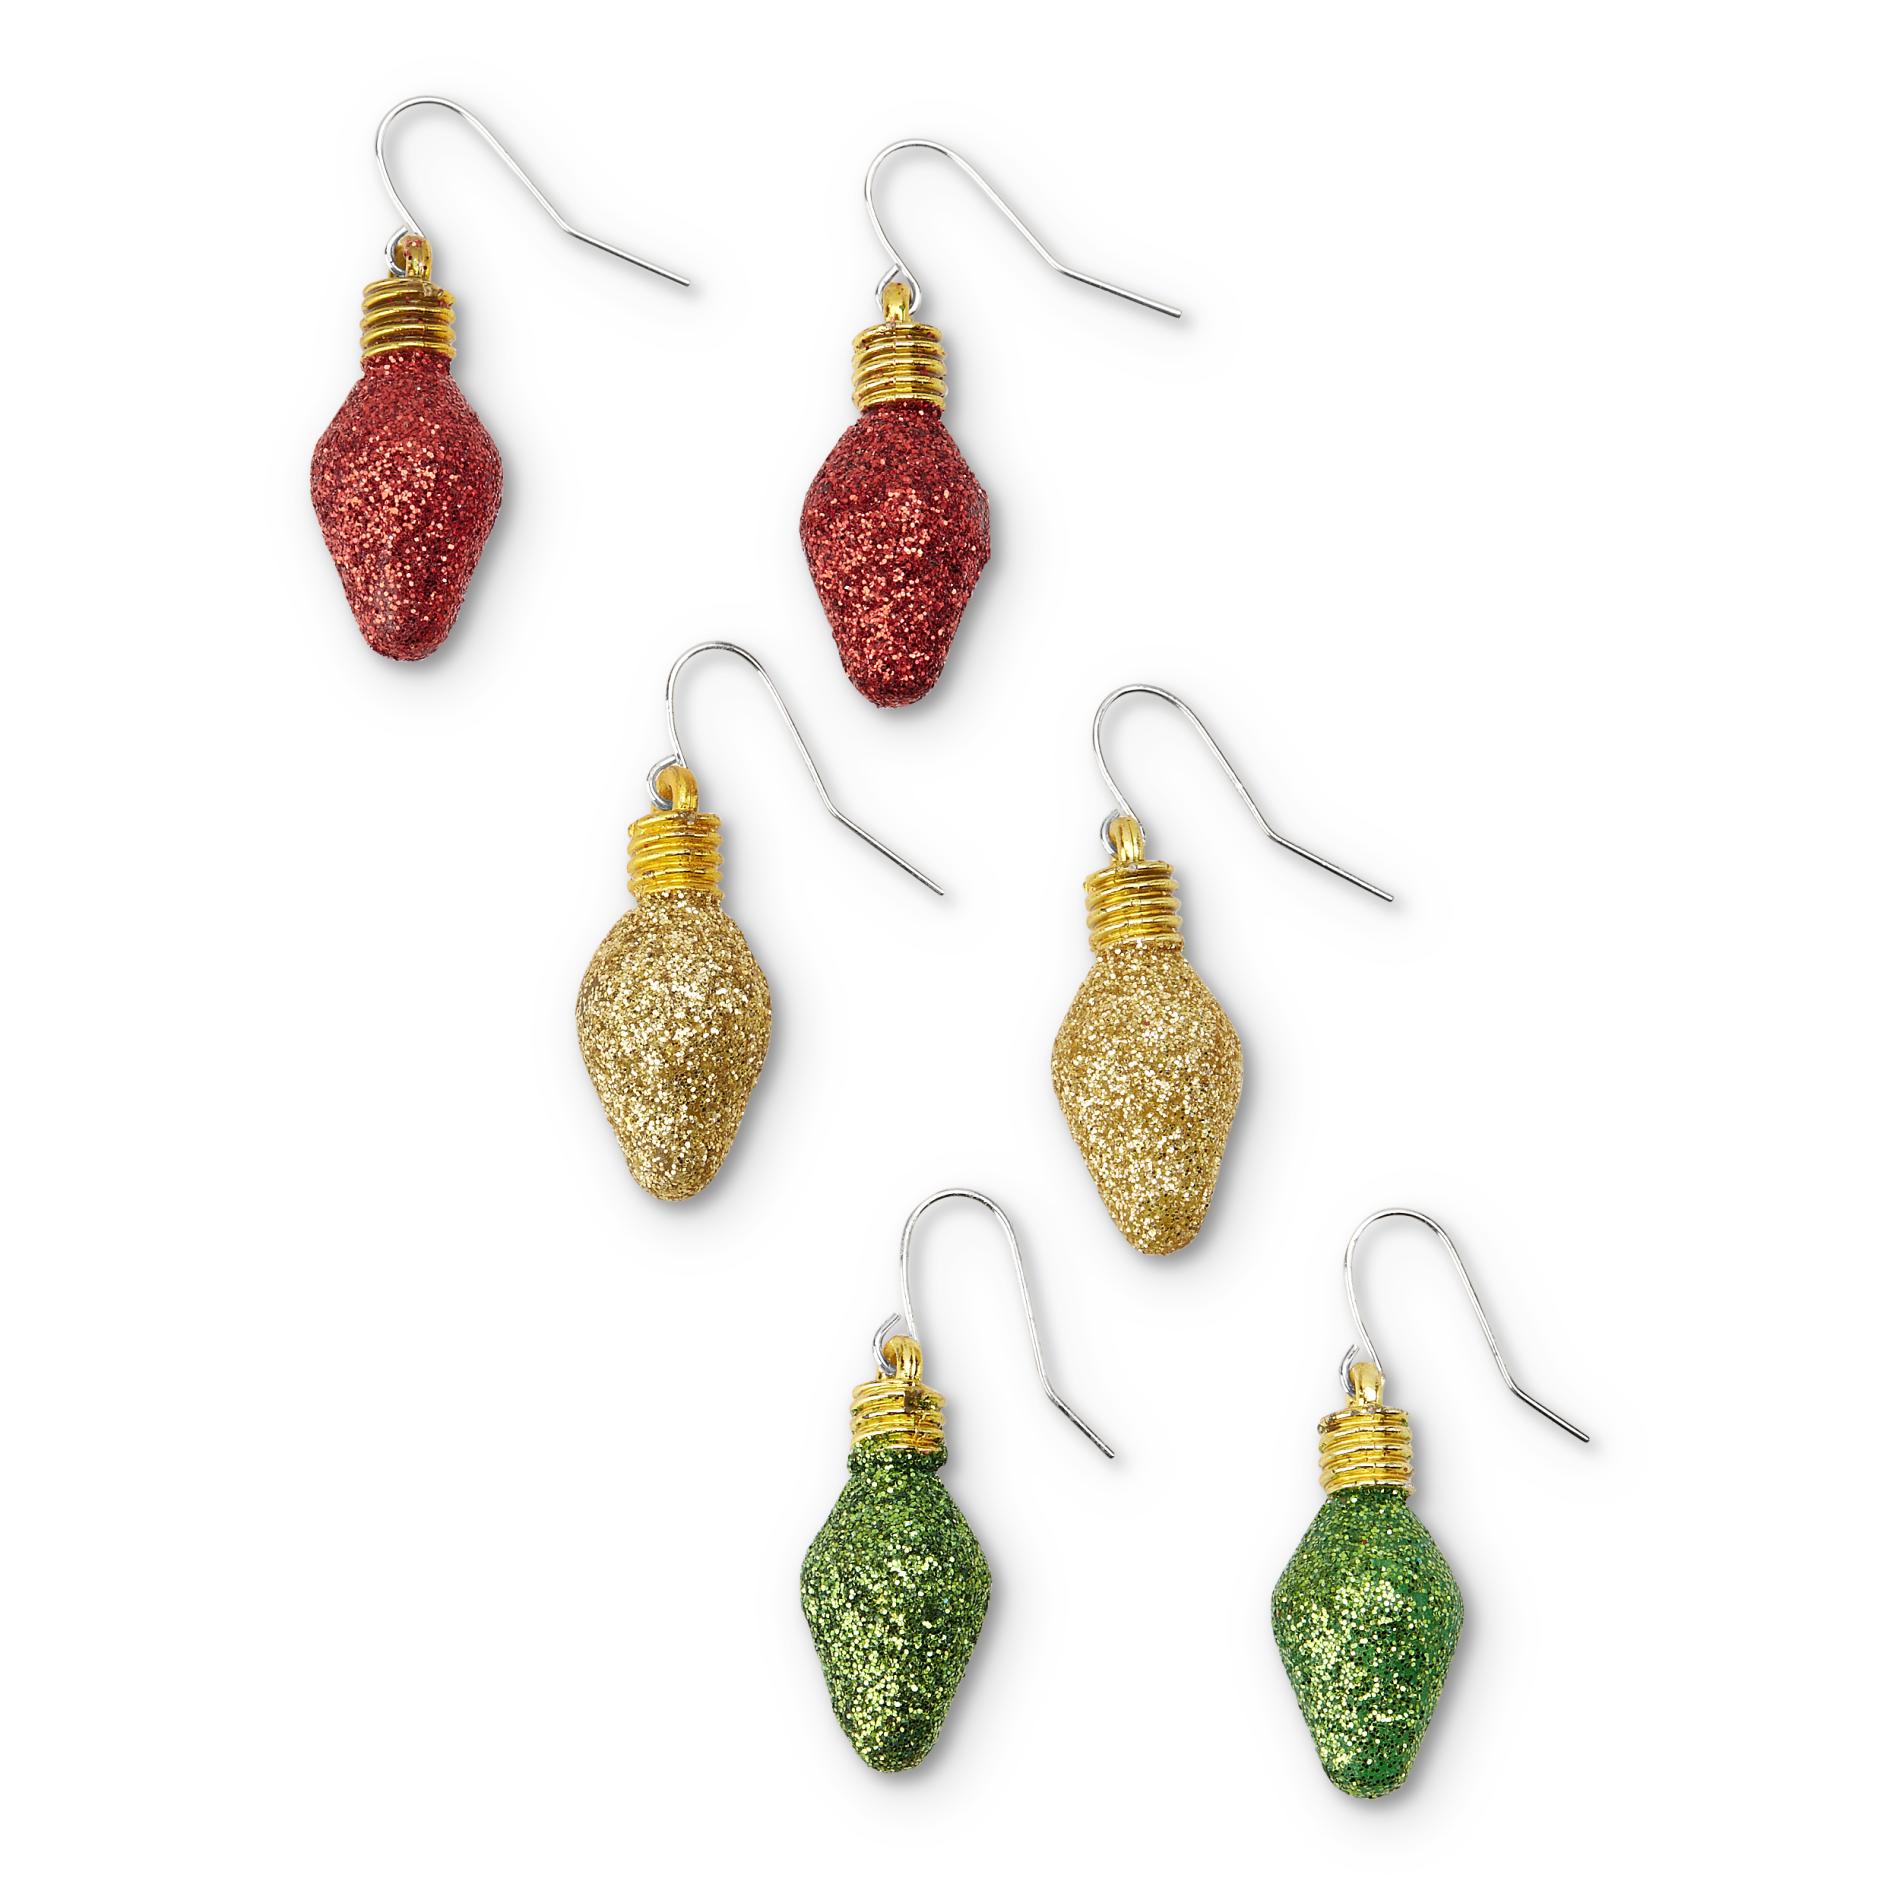 Holiday Editions Women's 3-Pairs Christmas Dangle Earrings - Lights